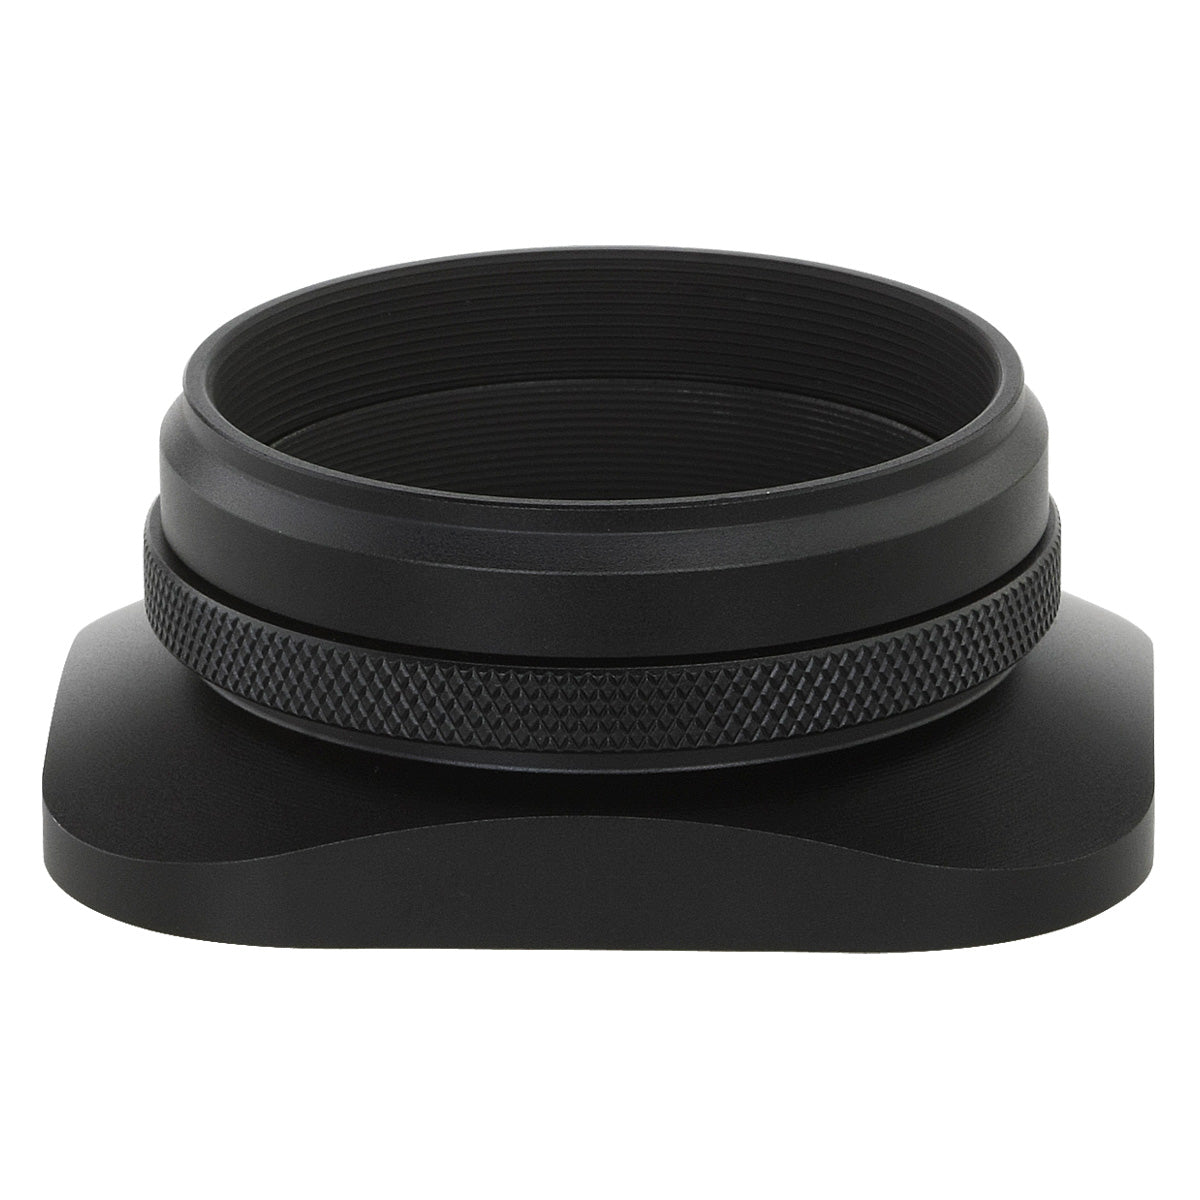 Haoge LH-E3T Square Metal Lens Hood with 49mm Adapter Ring with Cap for Fujifilm Fuji FinePix X100 X100S X100T X70 X100F X100V Camera Replaces Fujifilm LH-X100 AR-X100 LH-X70 Black